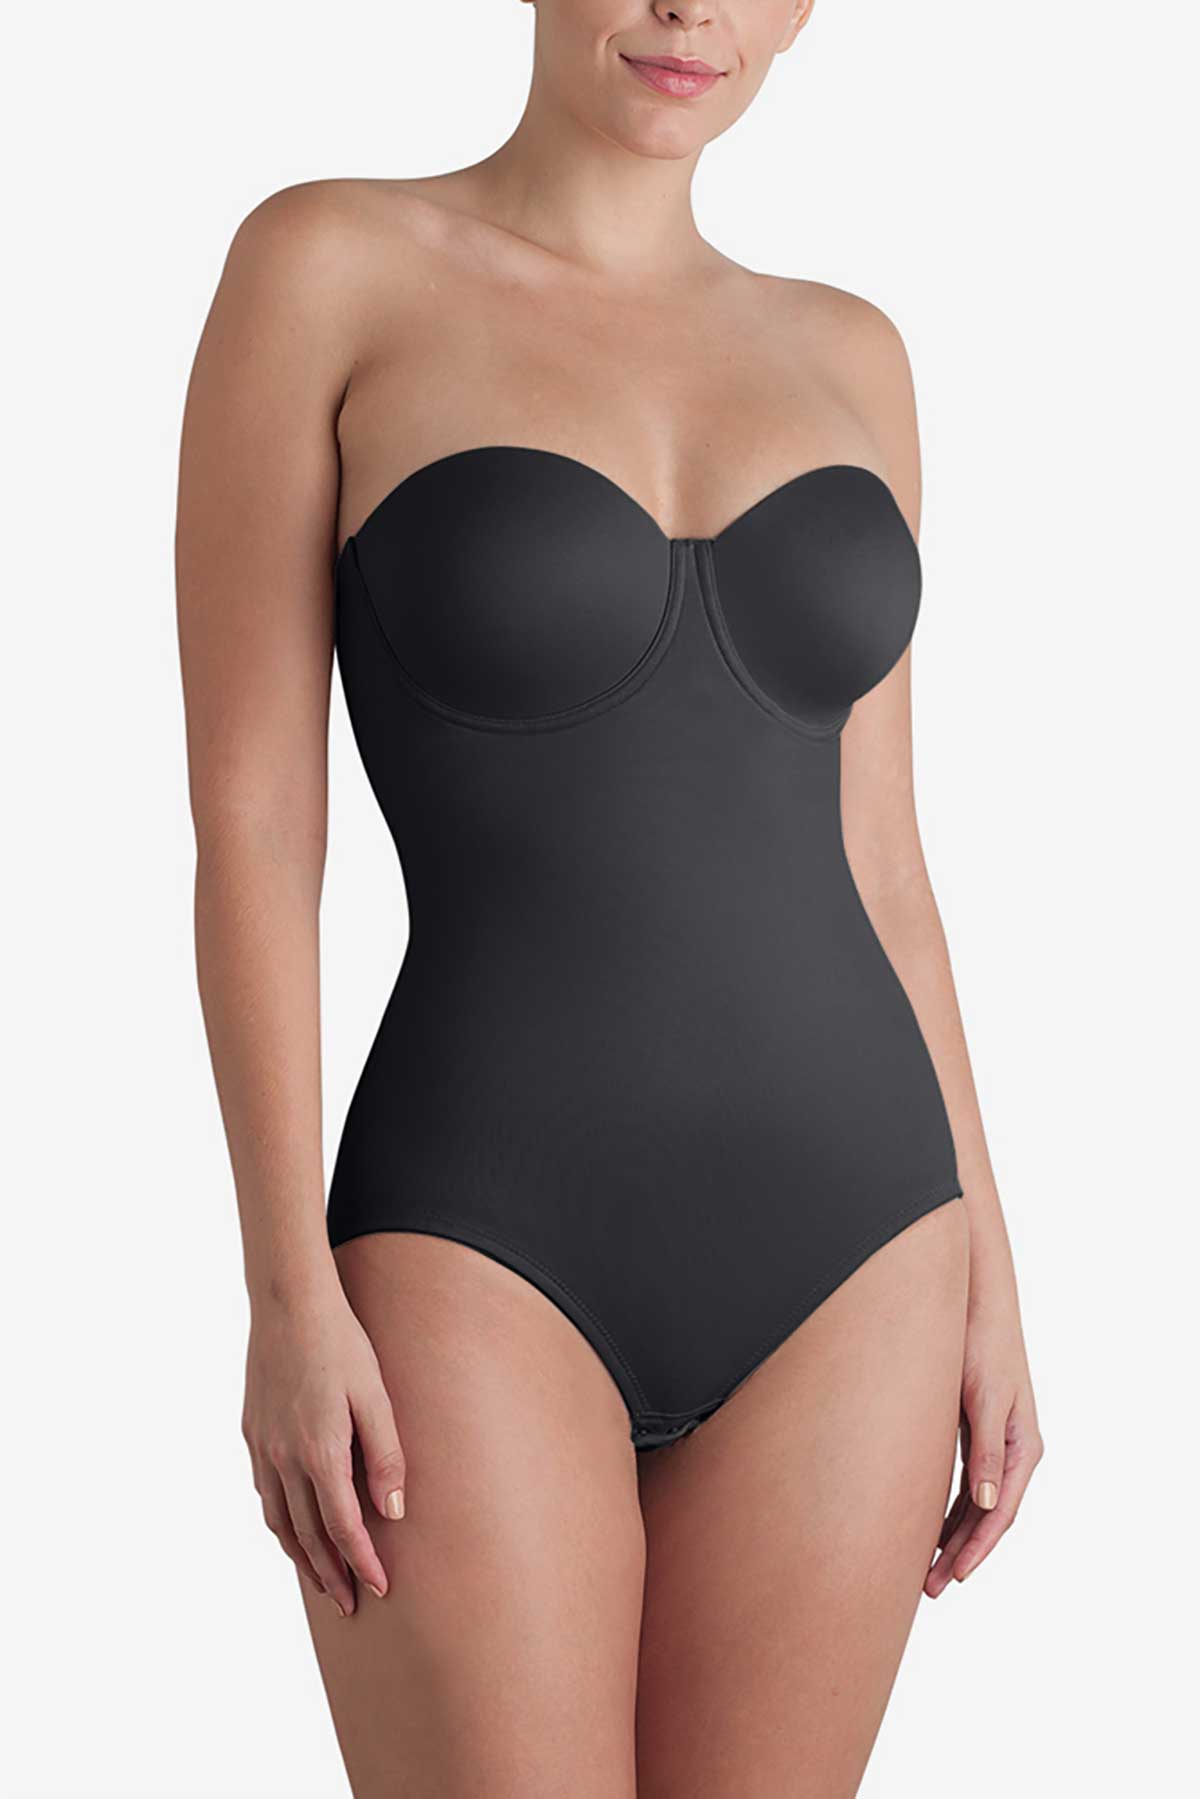 Miraclesuit Shapewear Extra Firm Sexy Sheer Shaping Bodybriefer